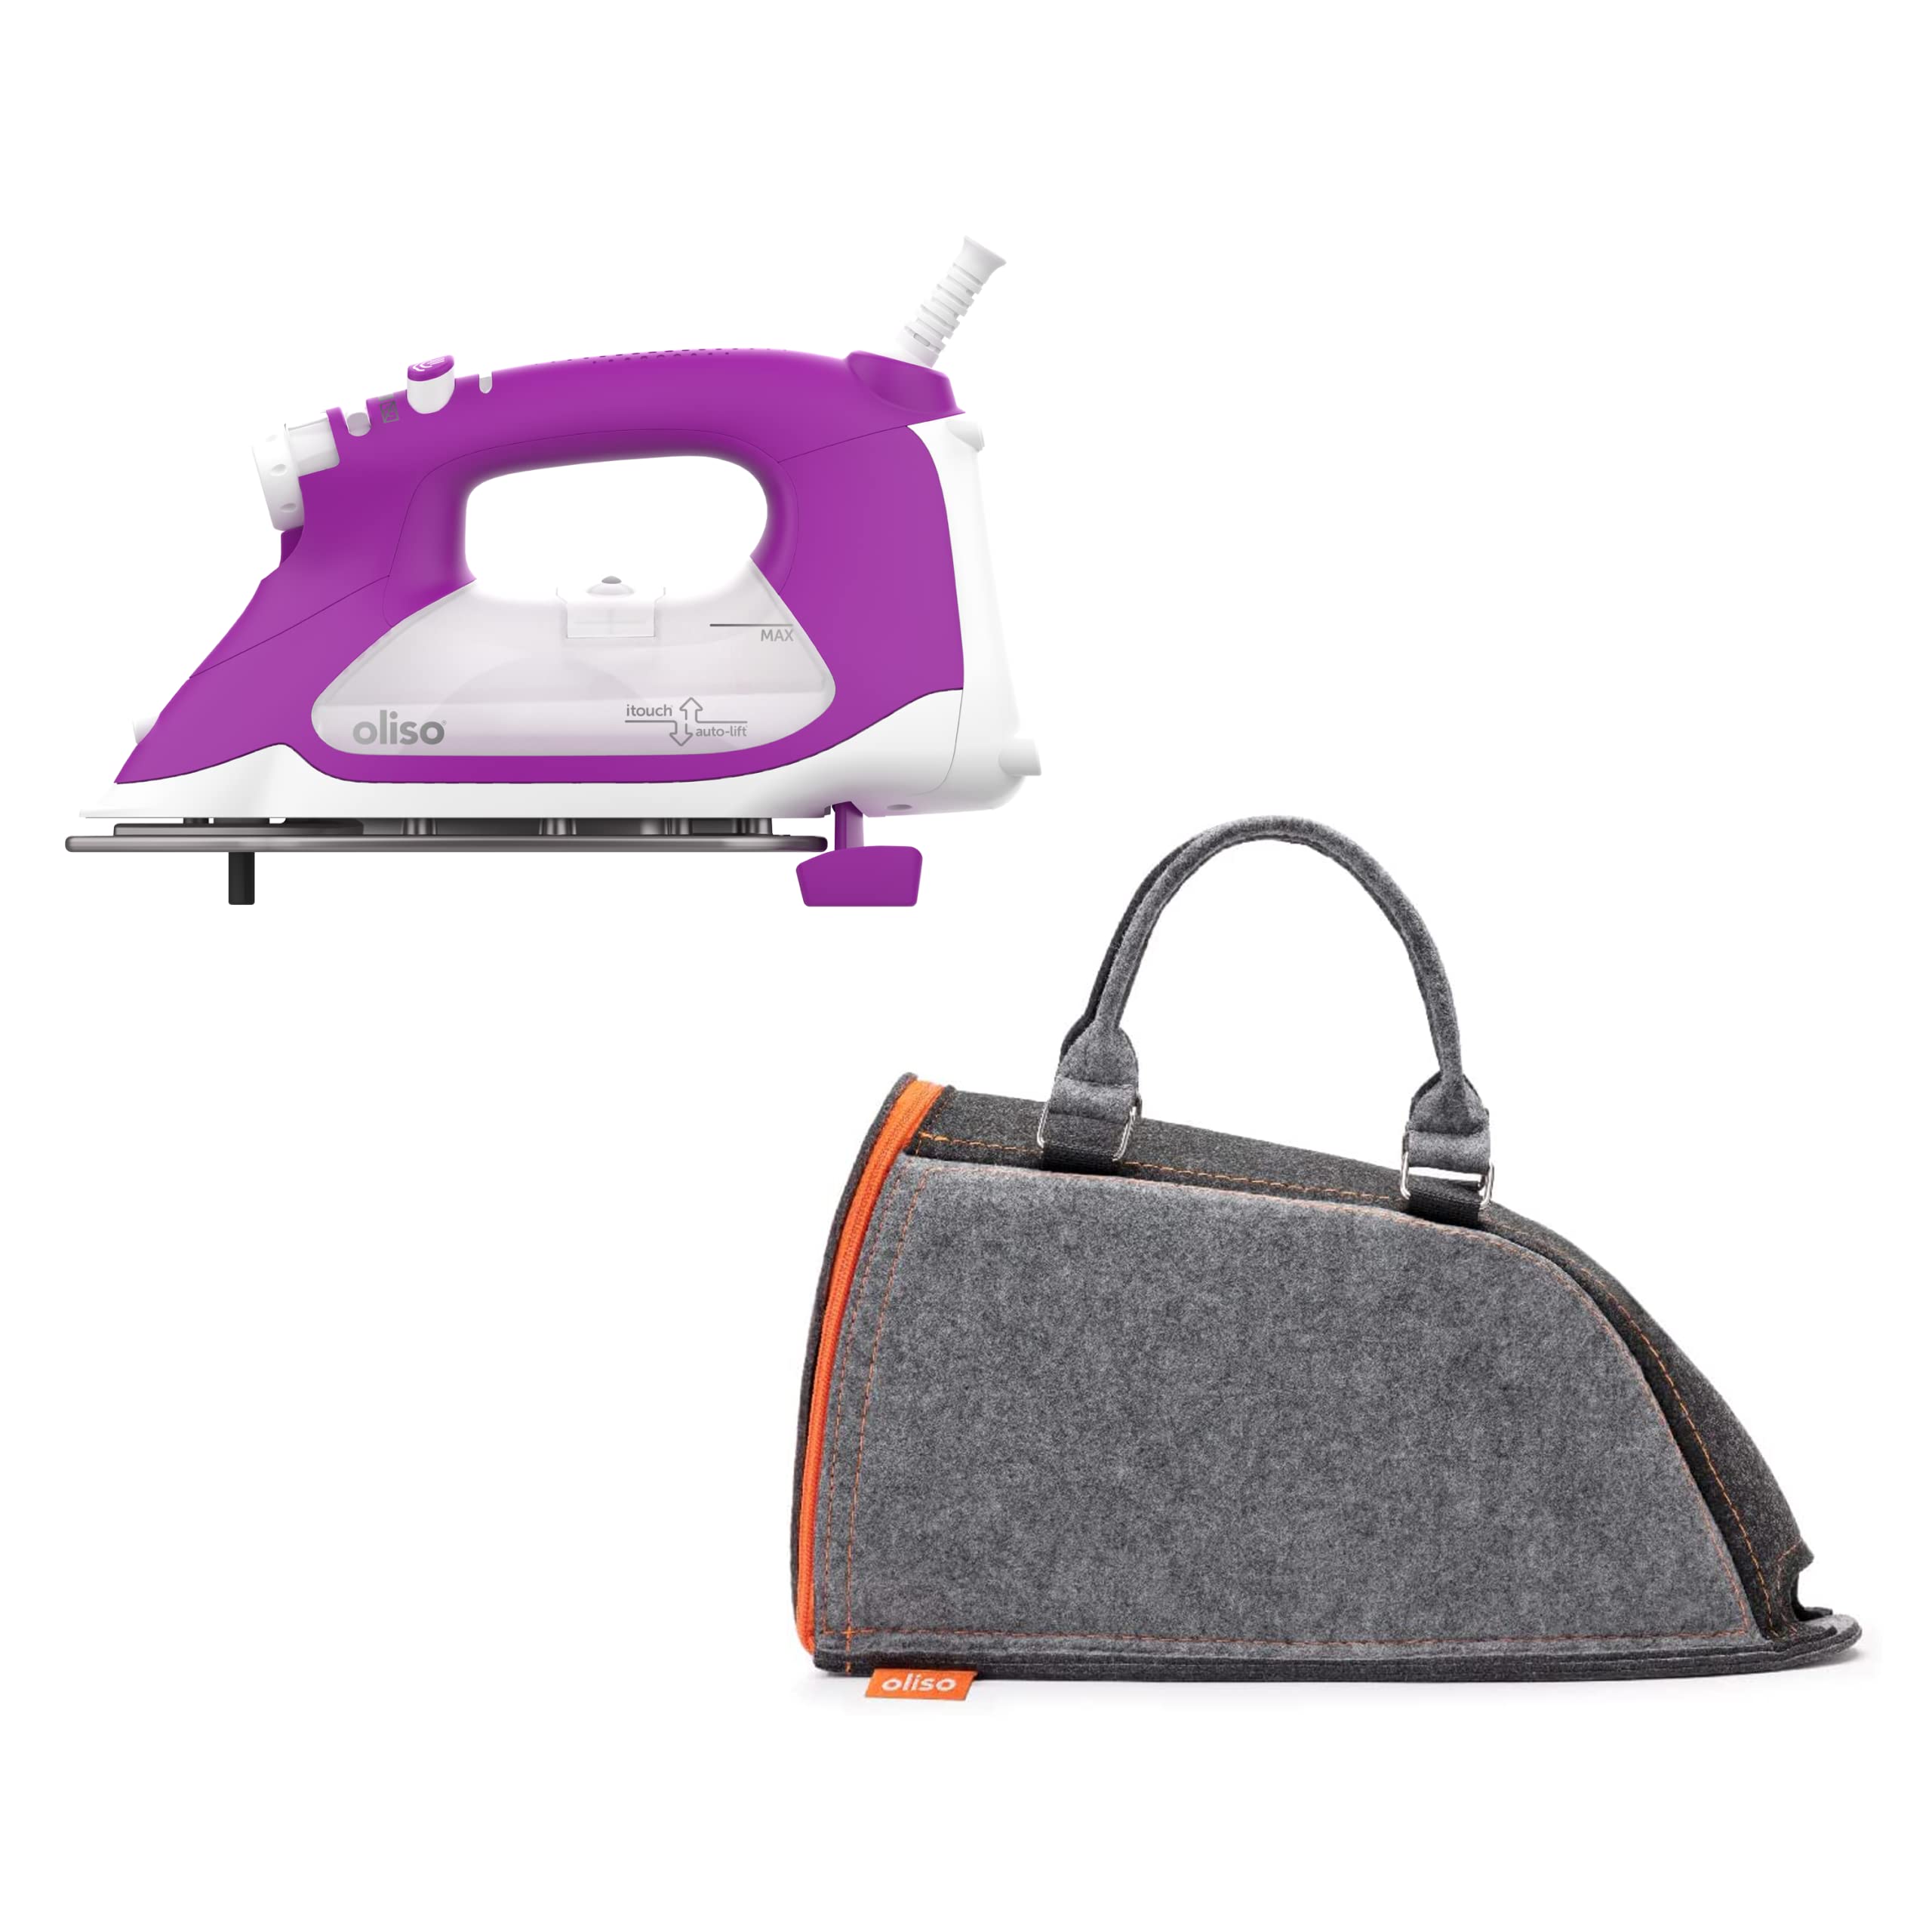 Oliso TG1600 Pro Plus 1800 Watt SmartIron with Auto Lift | Diamond Ceramic-Flow Soleplate Steam Iron (Orchid) + Oliso Carry Bag for full-size irons